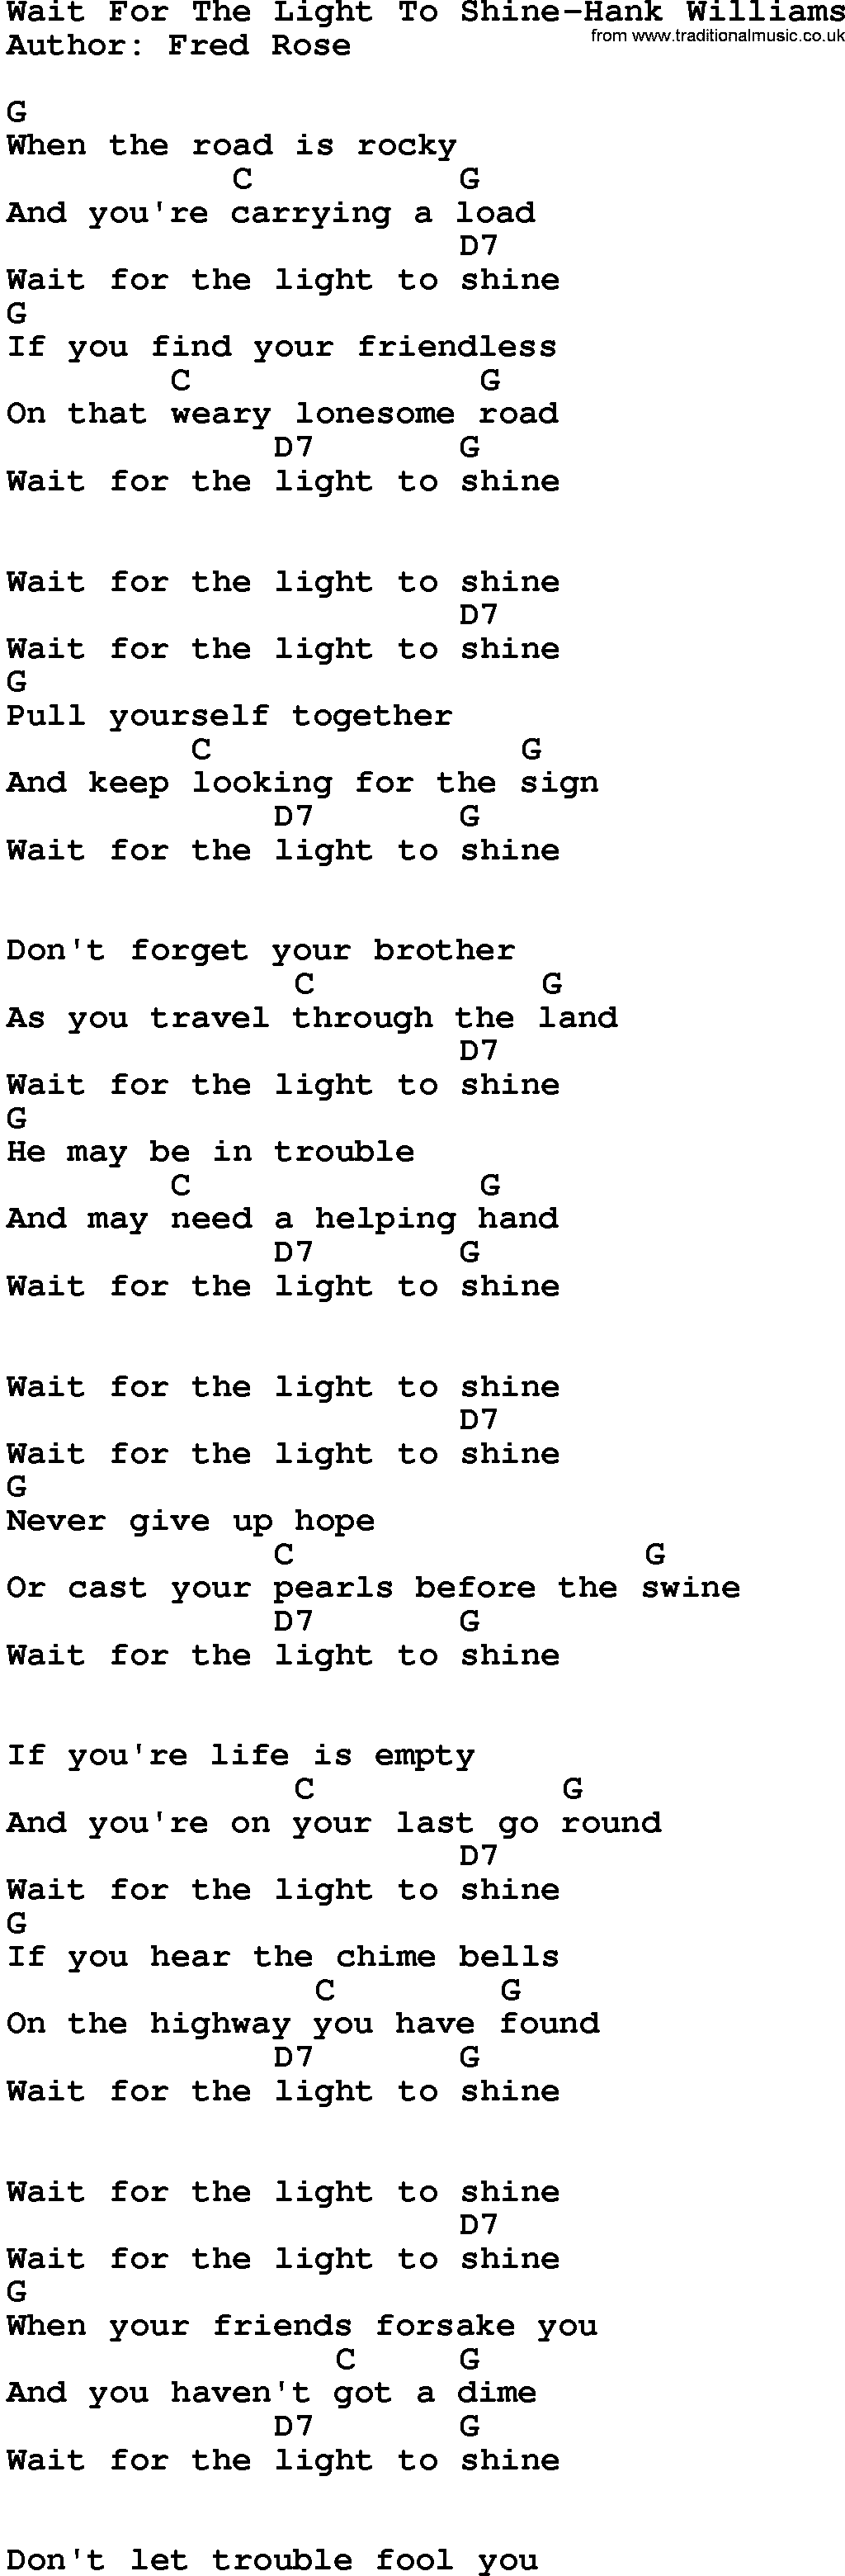 Country music song: Wait For The Light To Shine-Hank Williams lyrics and chords